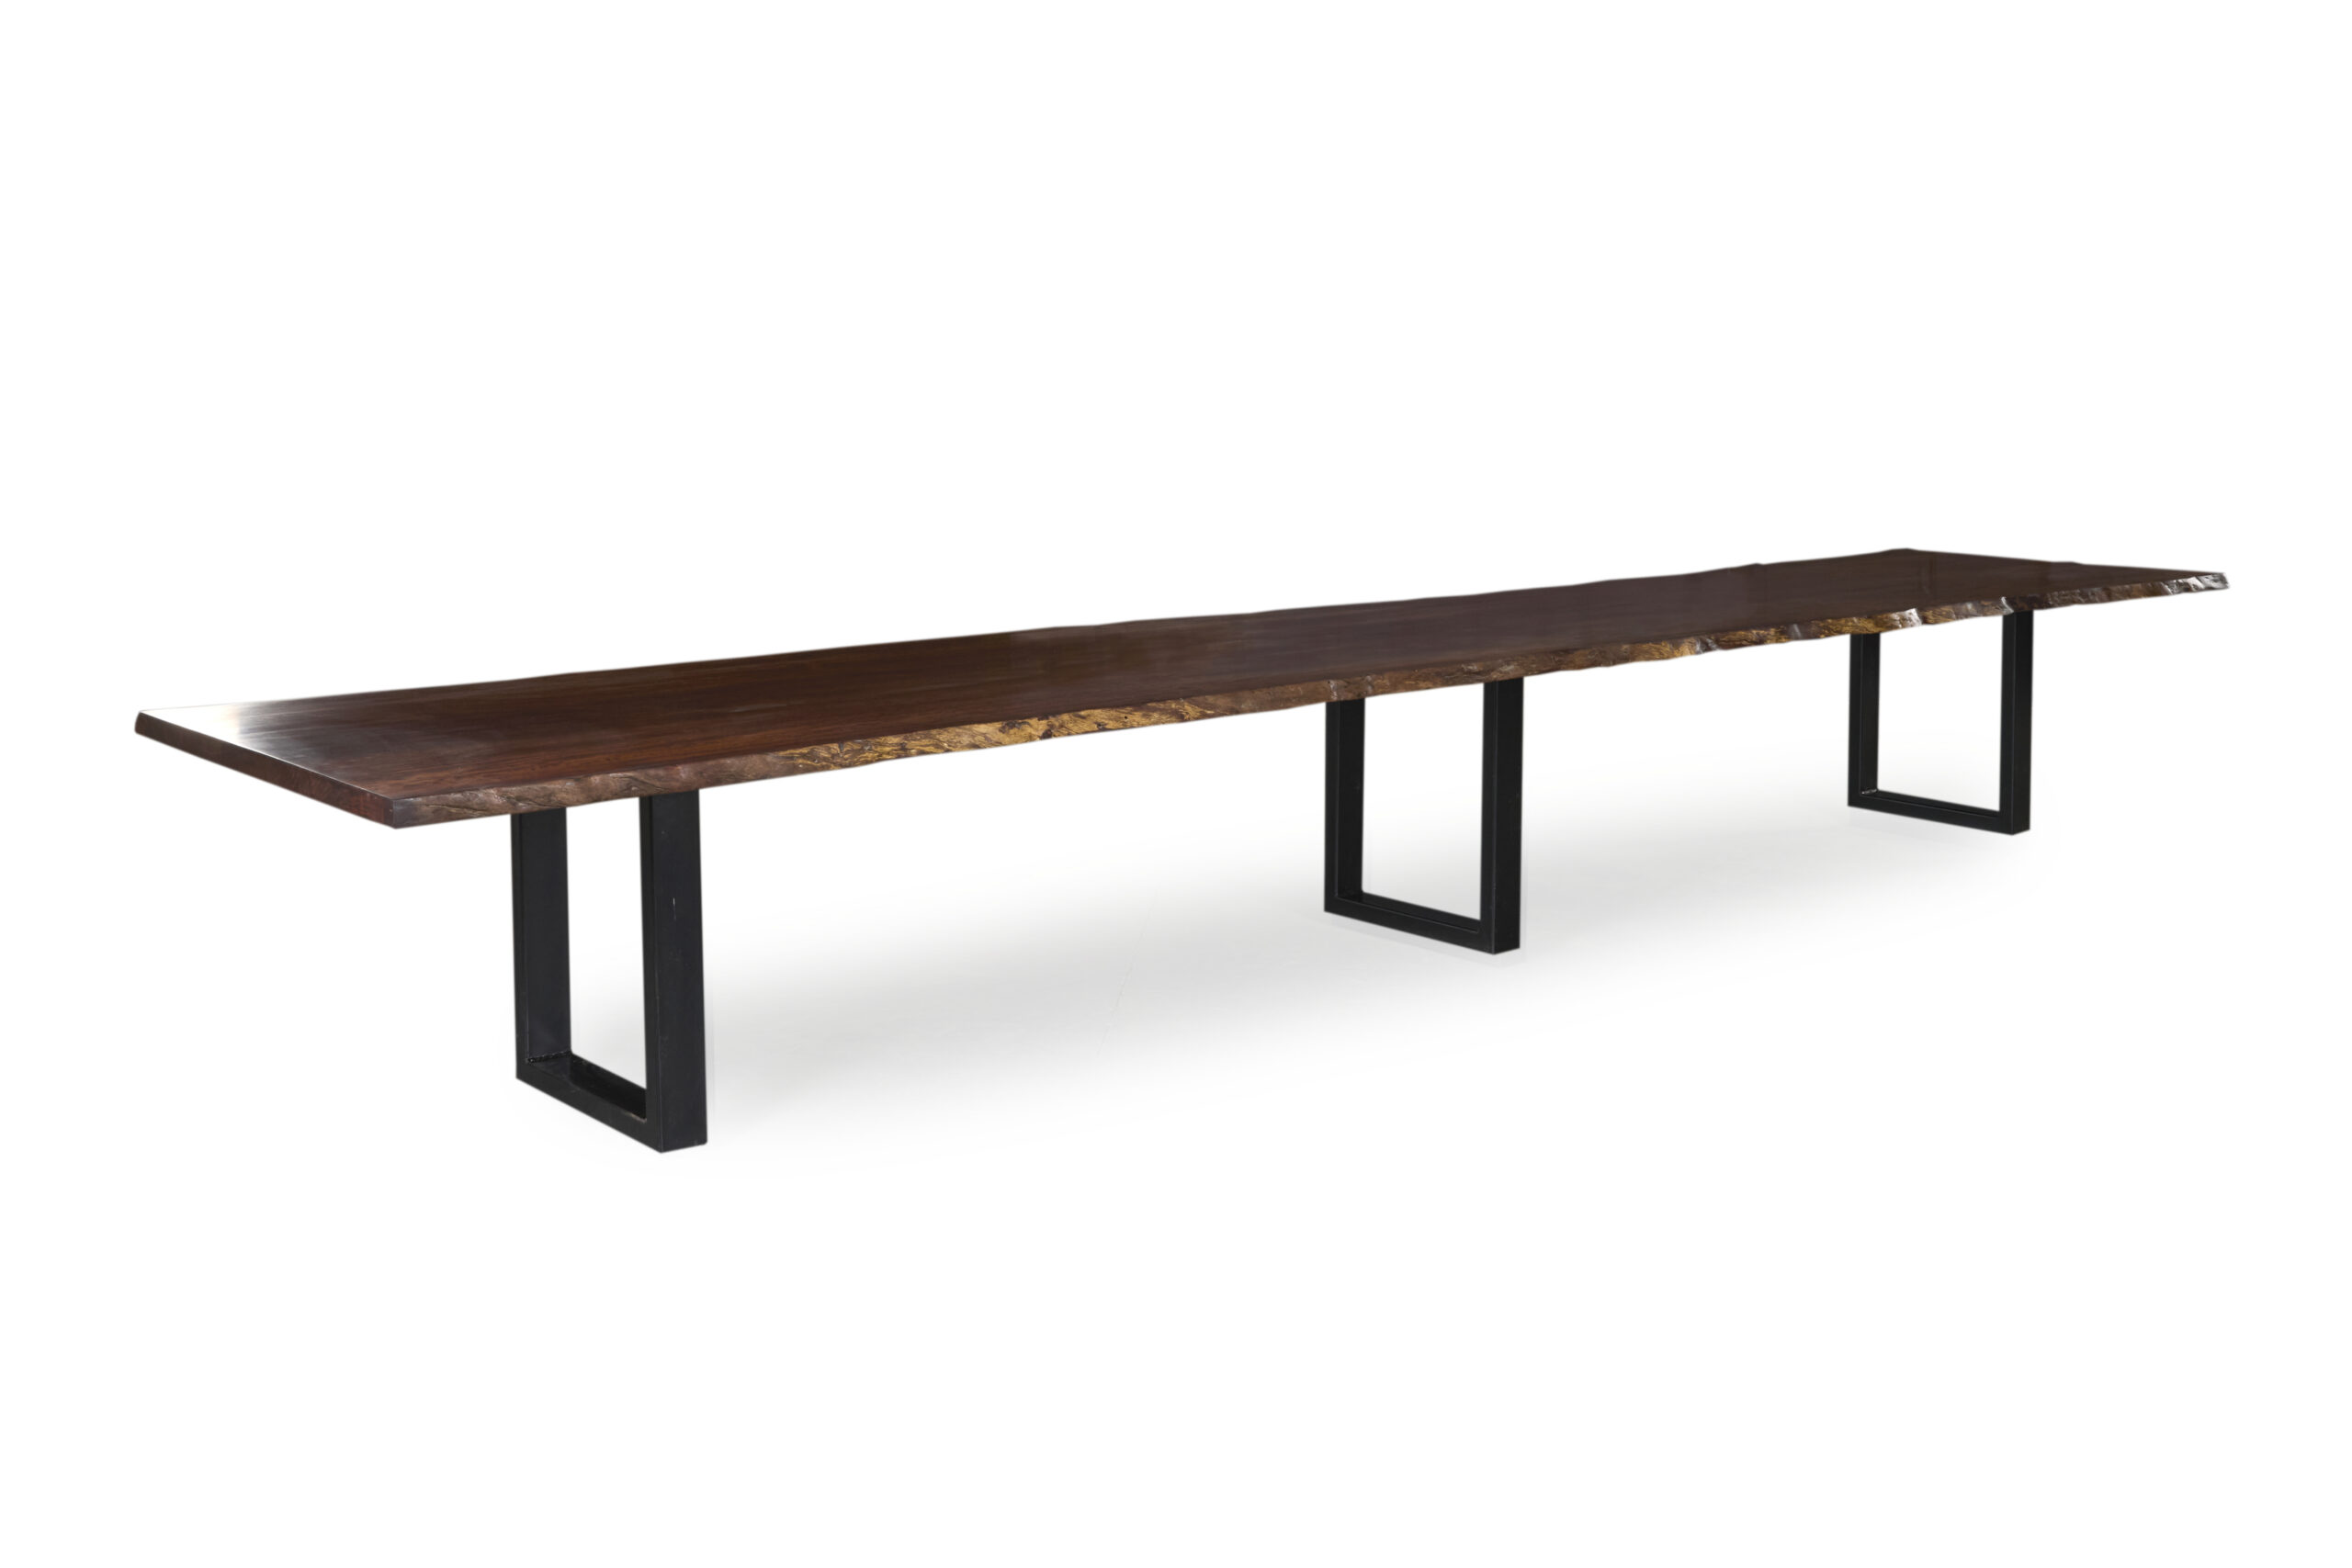 Versatile Brighton Table: Perfect for Dining or Boardroom Meetings